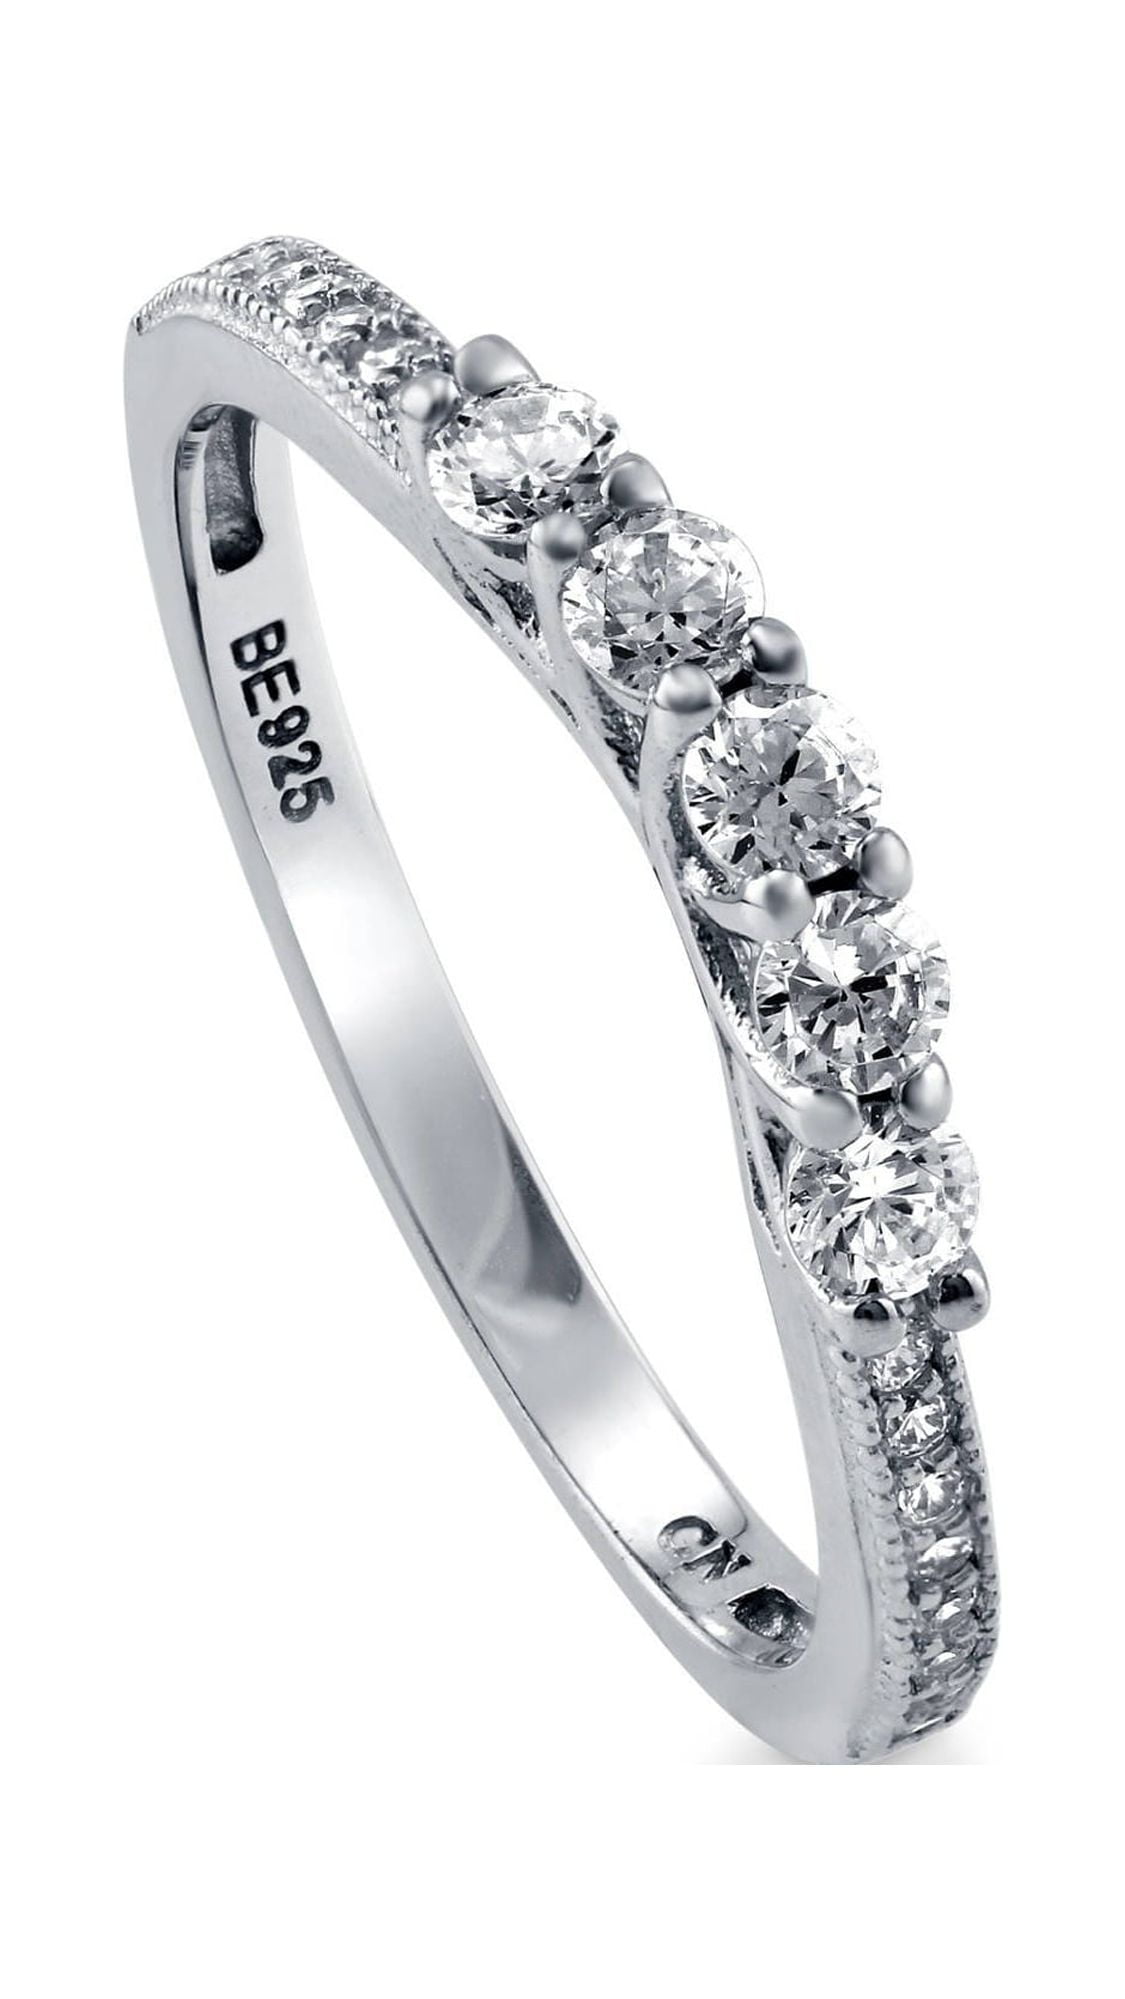 BERRICLE Sterling Silver 5-Stone Wedding Rings Cubic Zirconia CZ  Anniversary Curved Half Eternity Ring for Women, Rhodium Plated Size 4.5